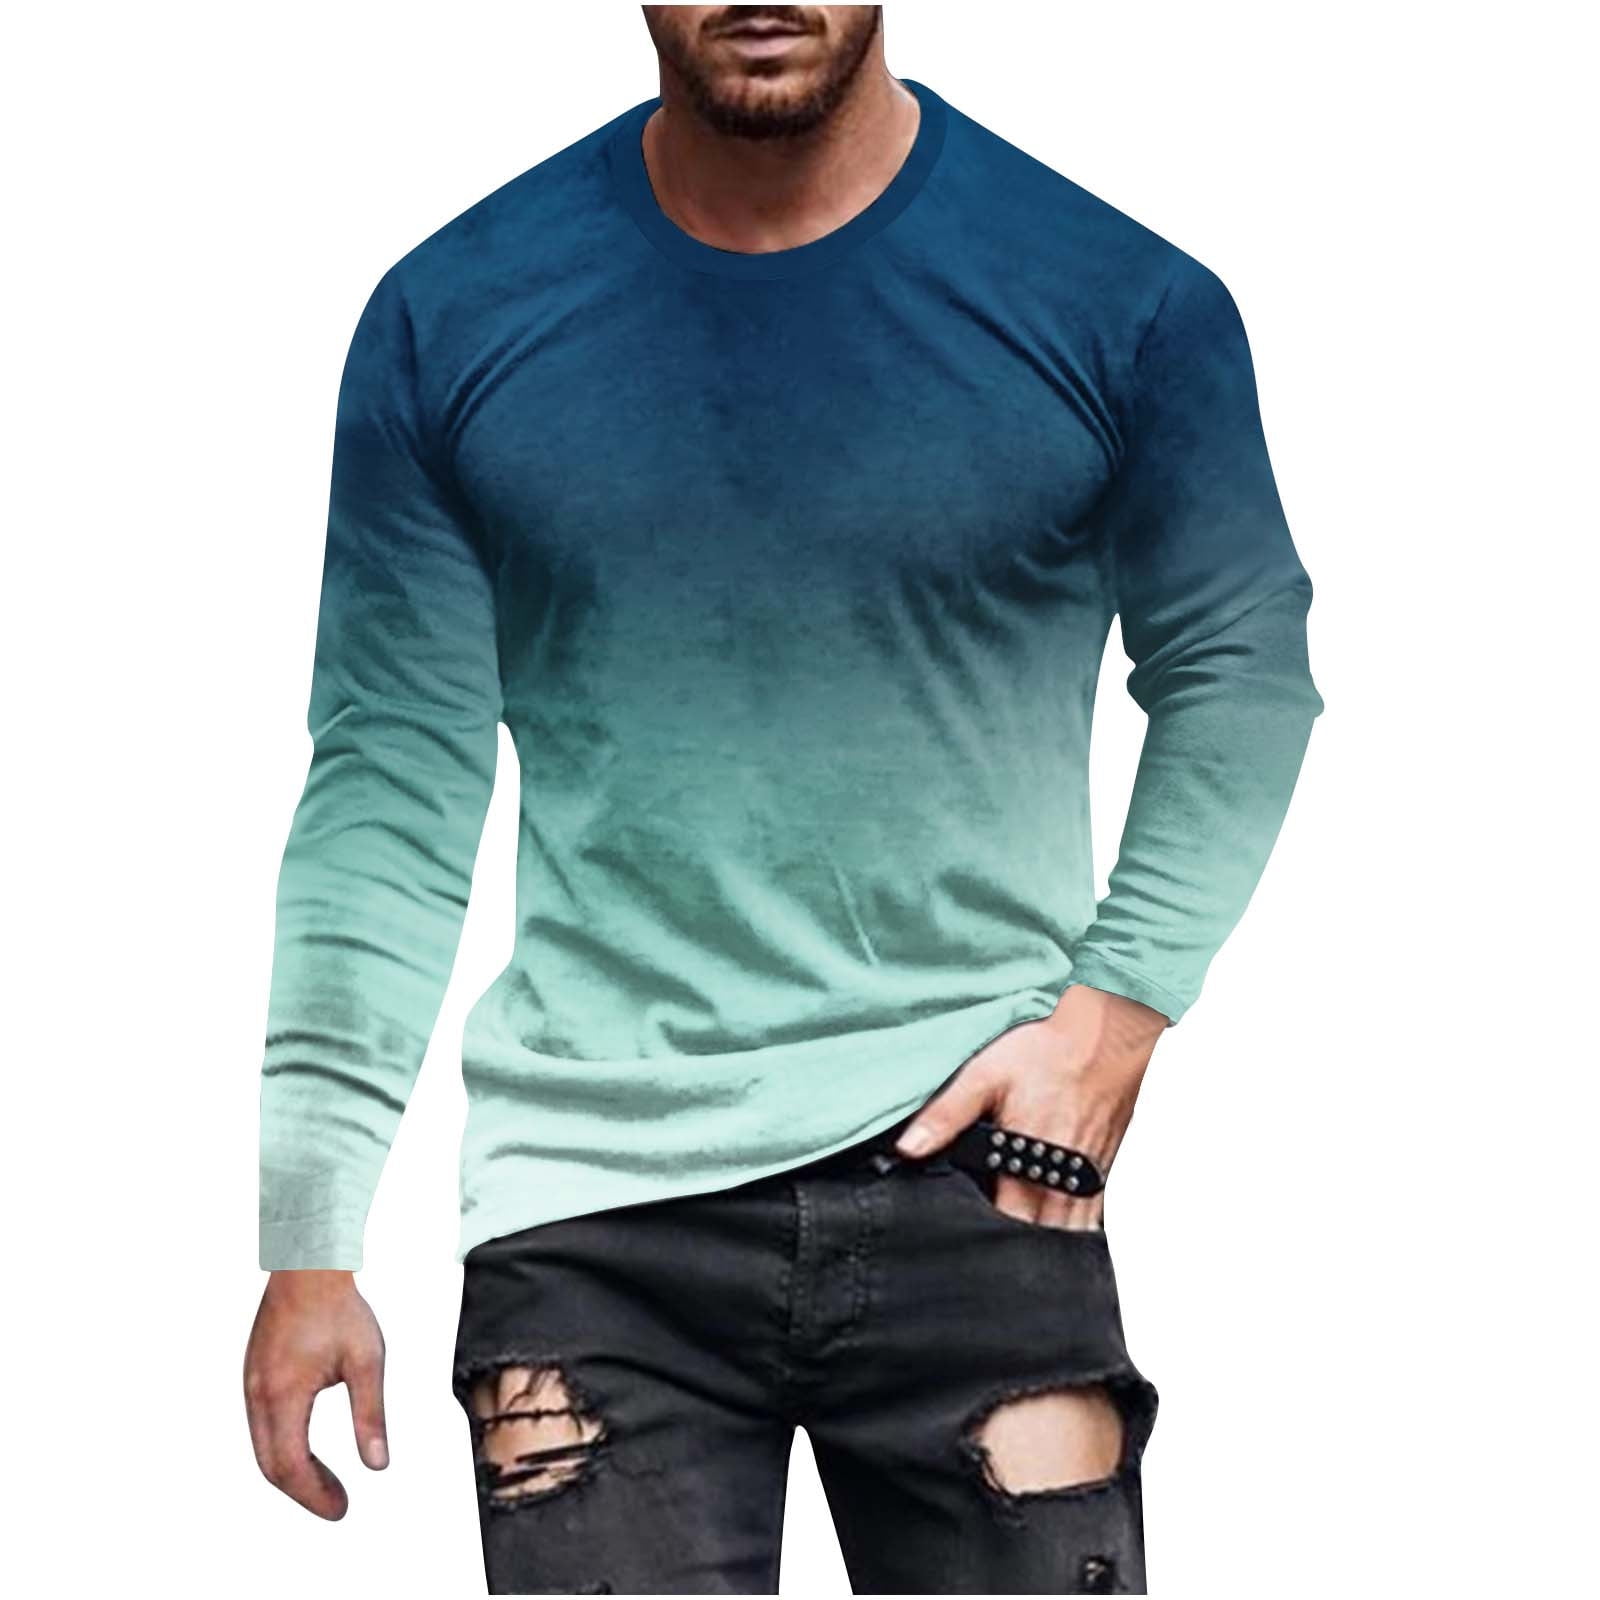 Soft Style T-Shirt for Men Round Neck On Sale Long Sleeve T Shirts for ...